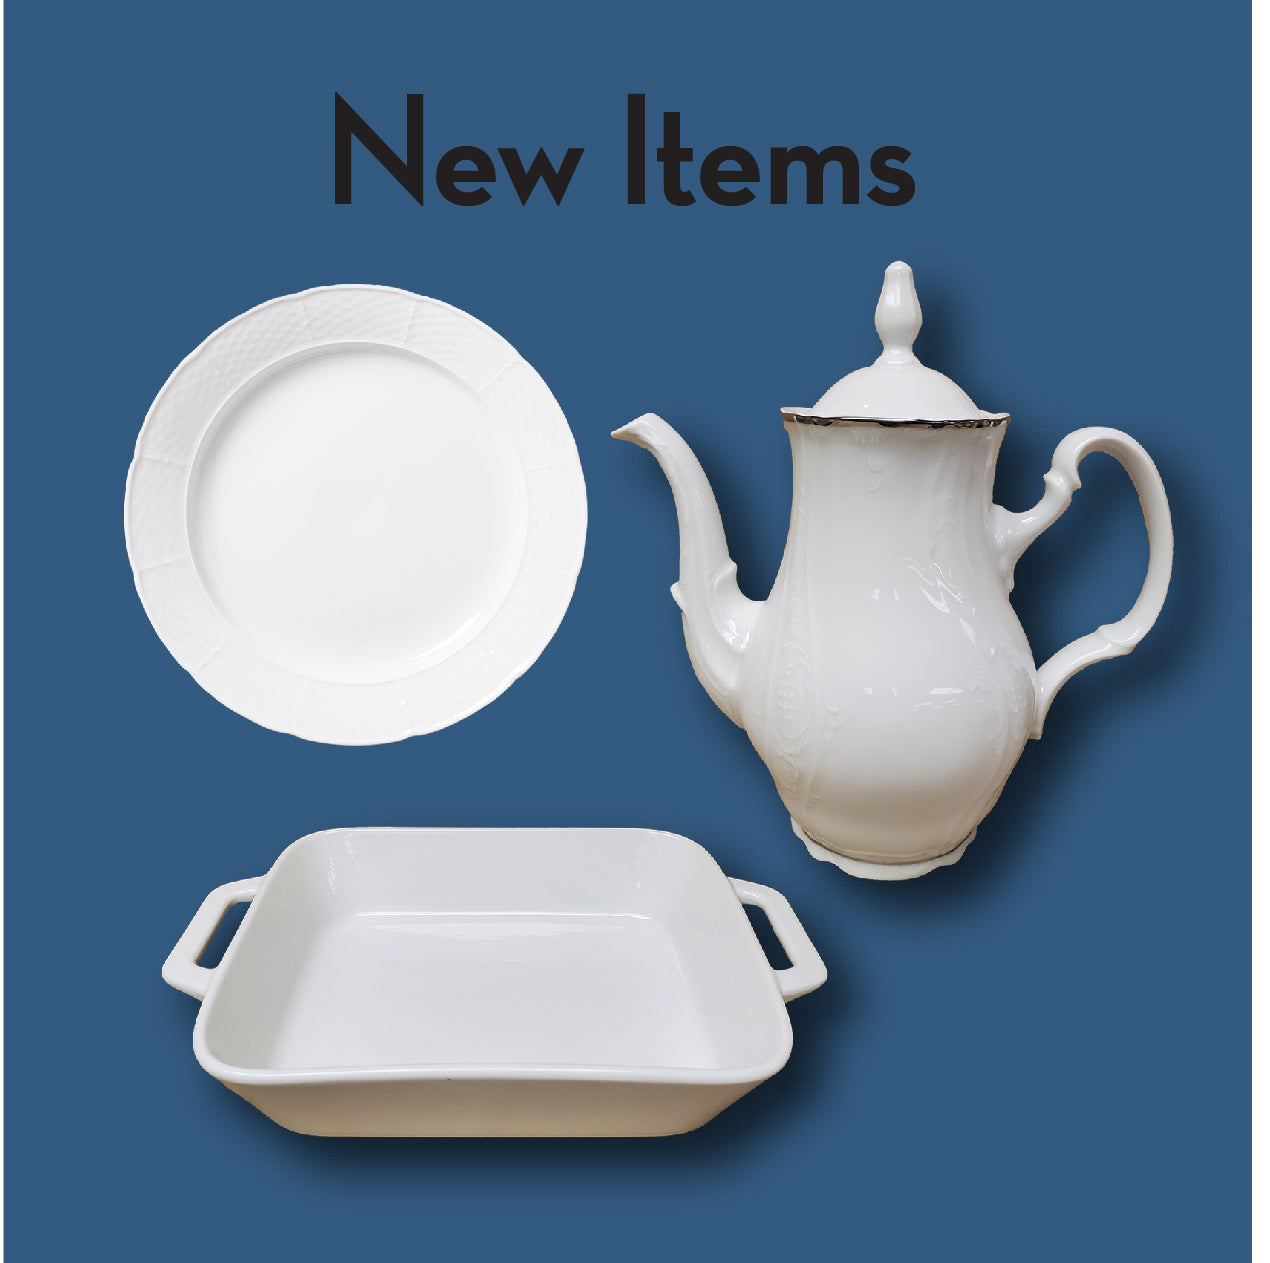 three new items on a blue background with New items title at top